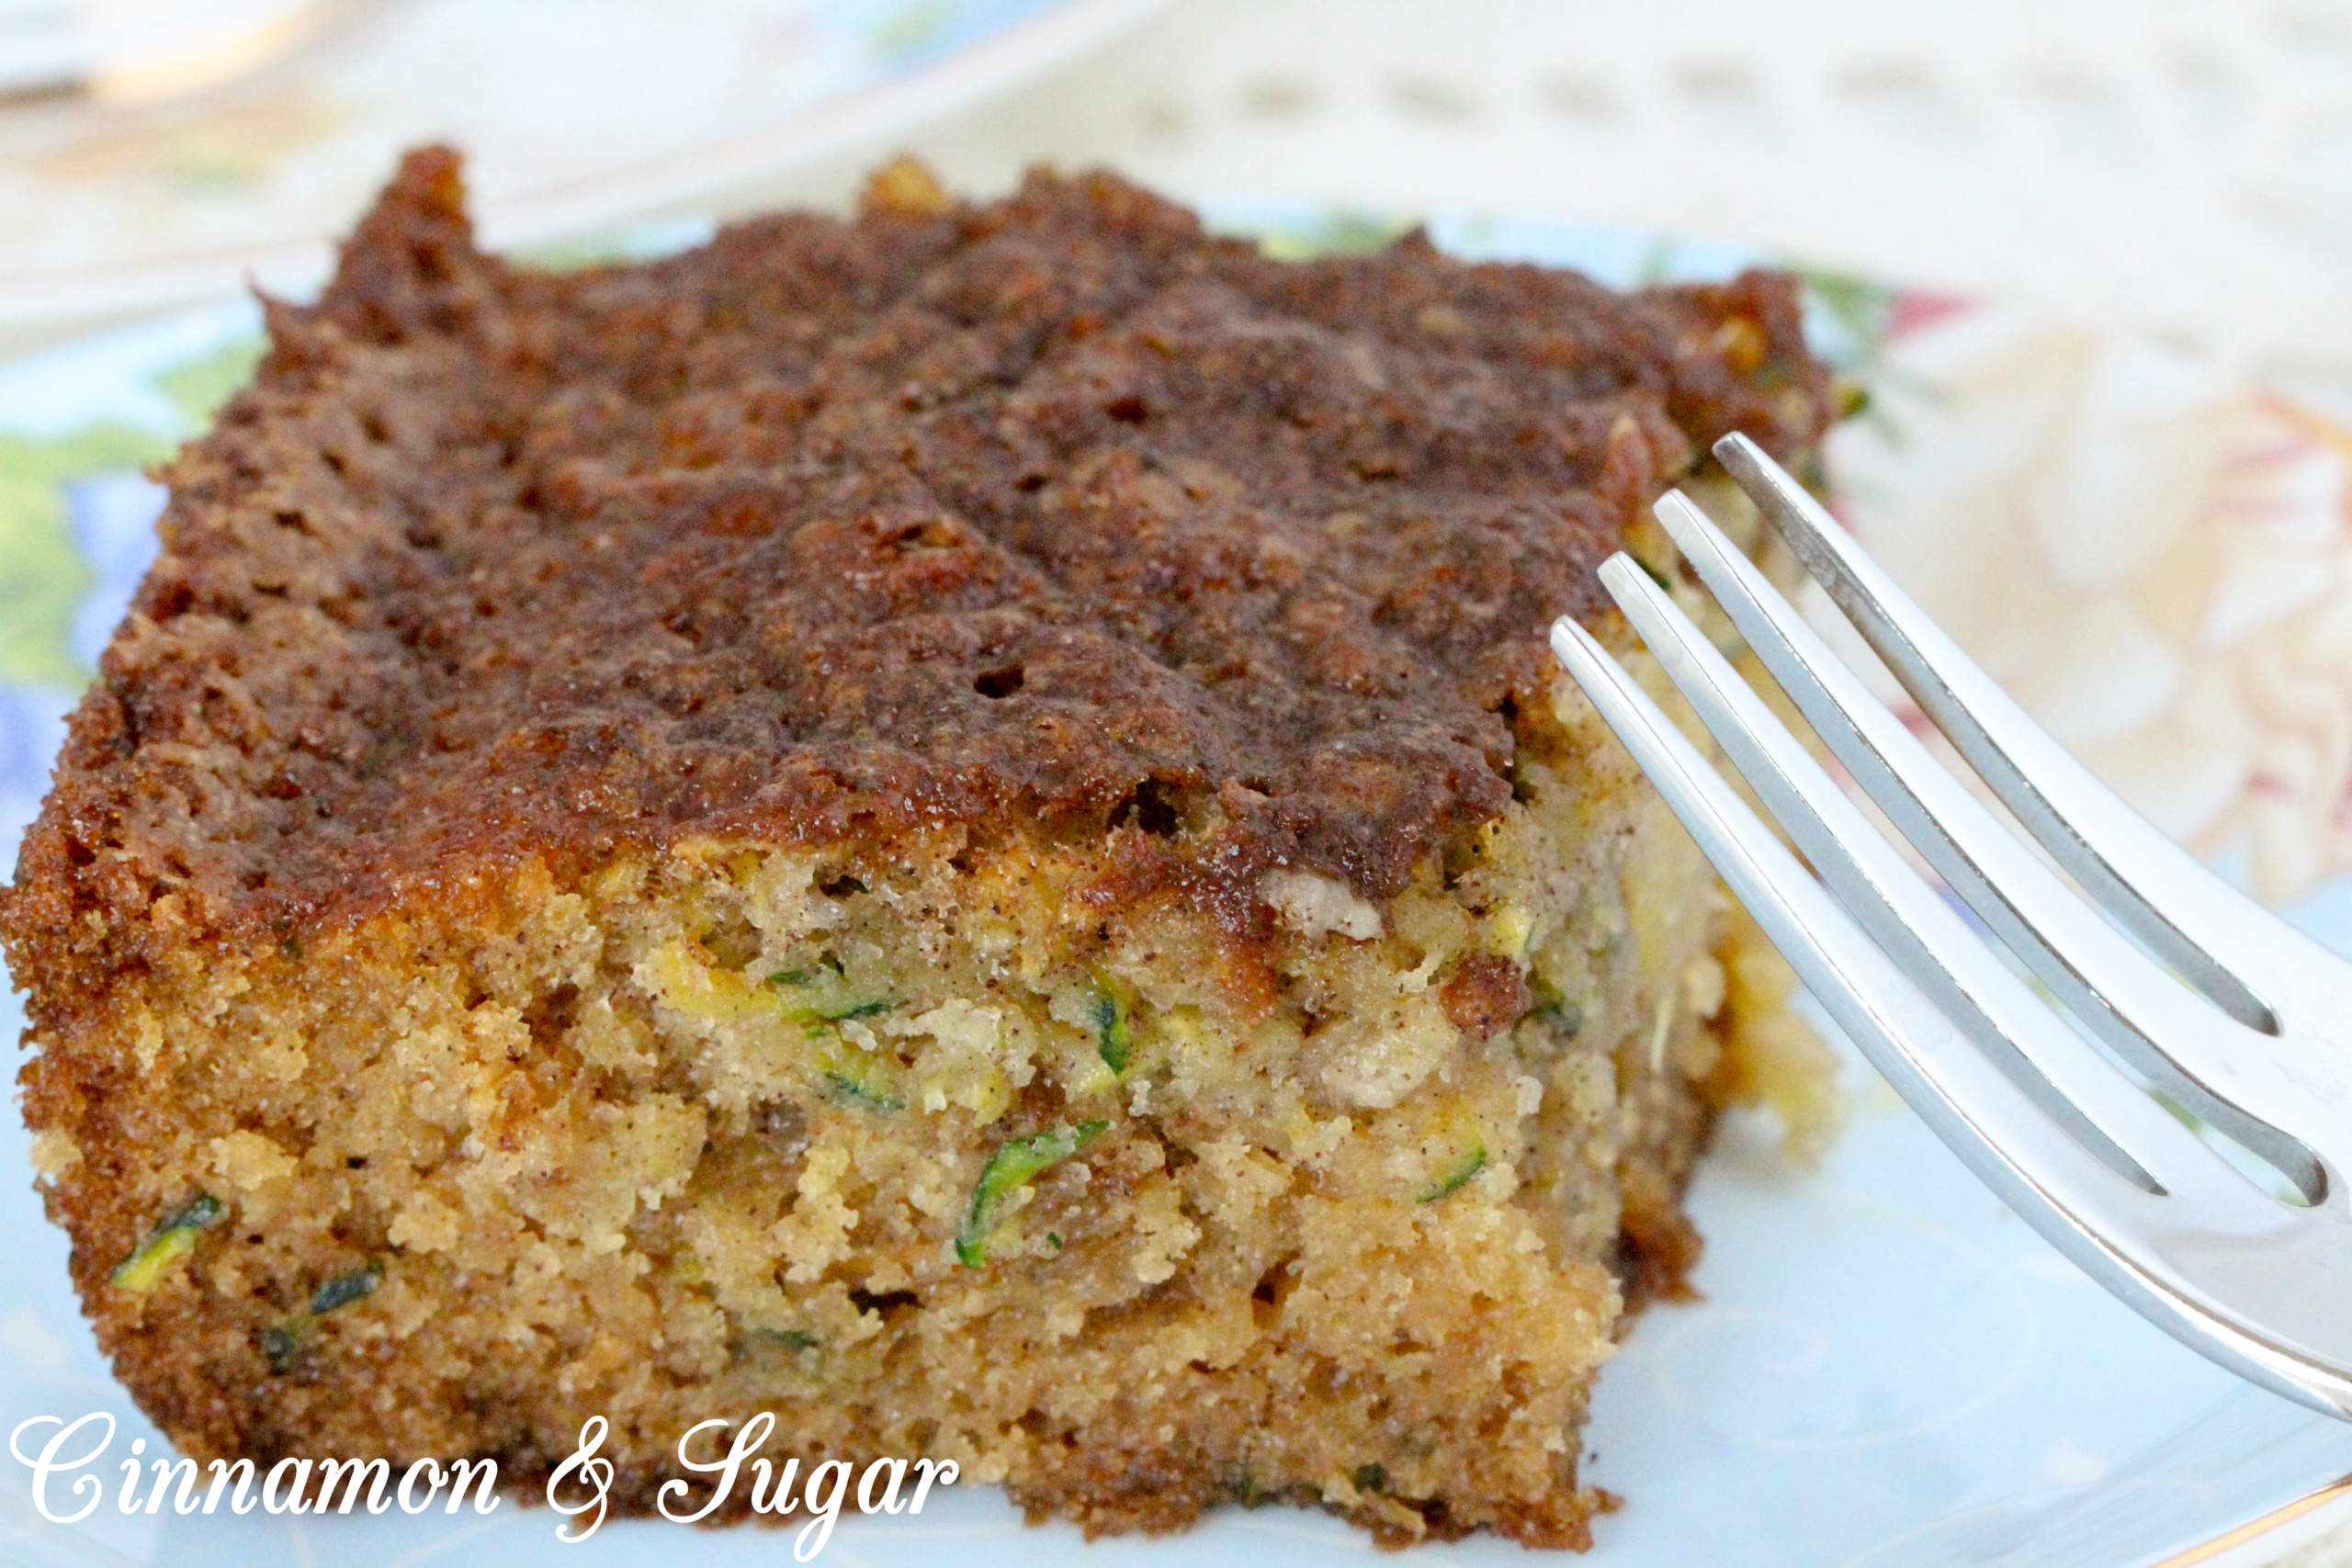 With a combination of both veggies and fruit, Zucchini Pineapple Cake is a supremely moist cake that's suitable for both dessert, snacks, or even breakfast. Recipe shared with permission granted by Krista Davis, author of THE DOG WHO KNEW TOO MUCH. 